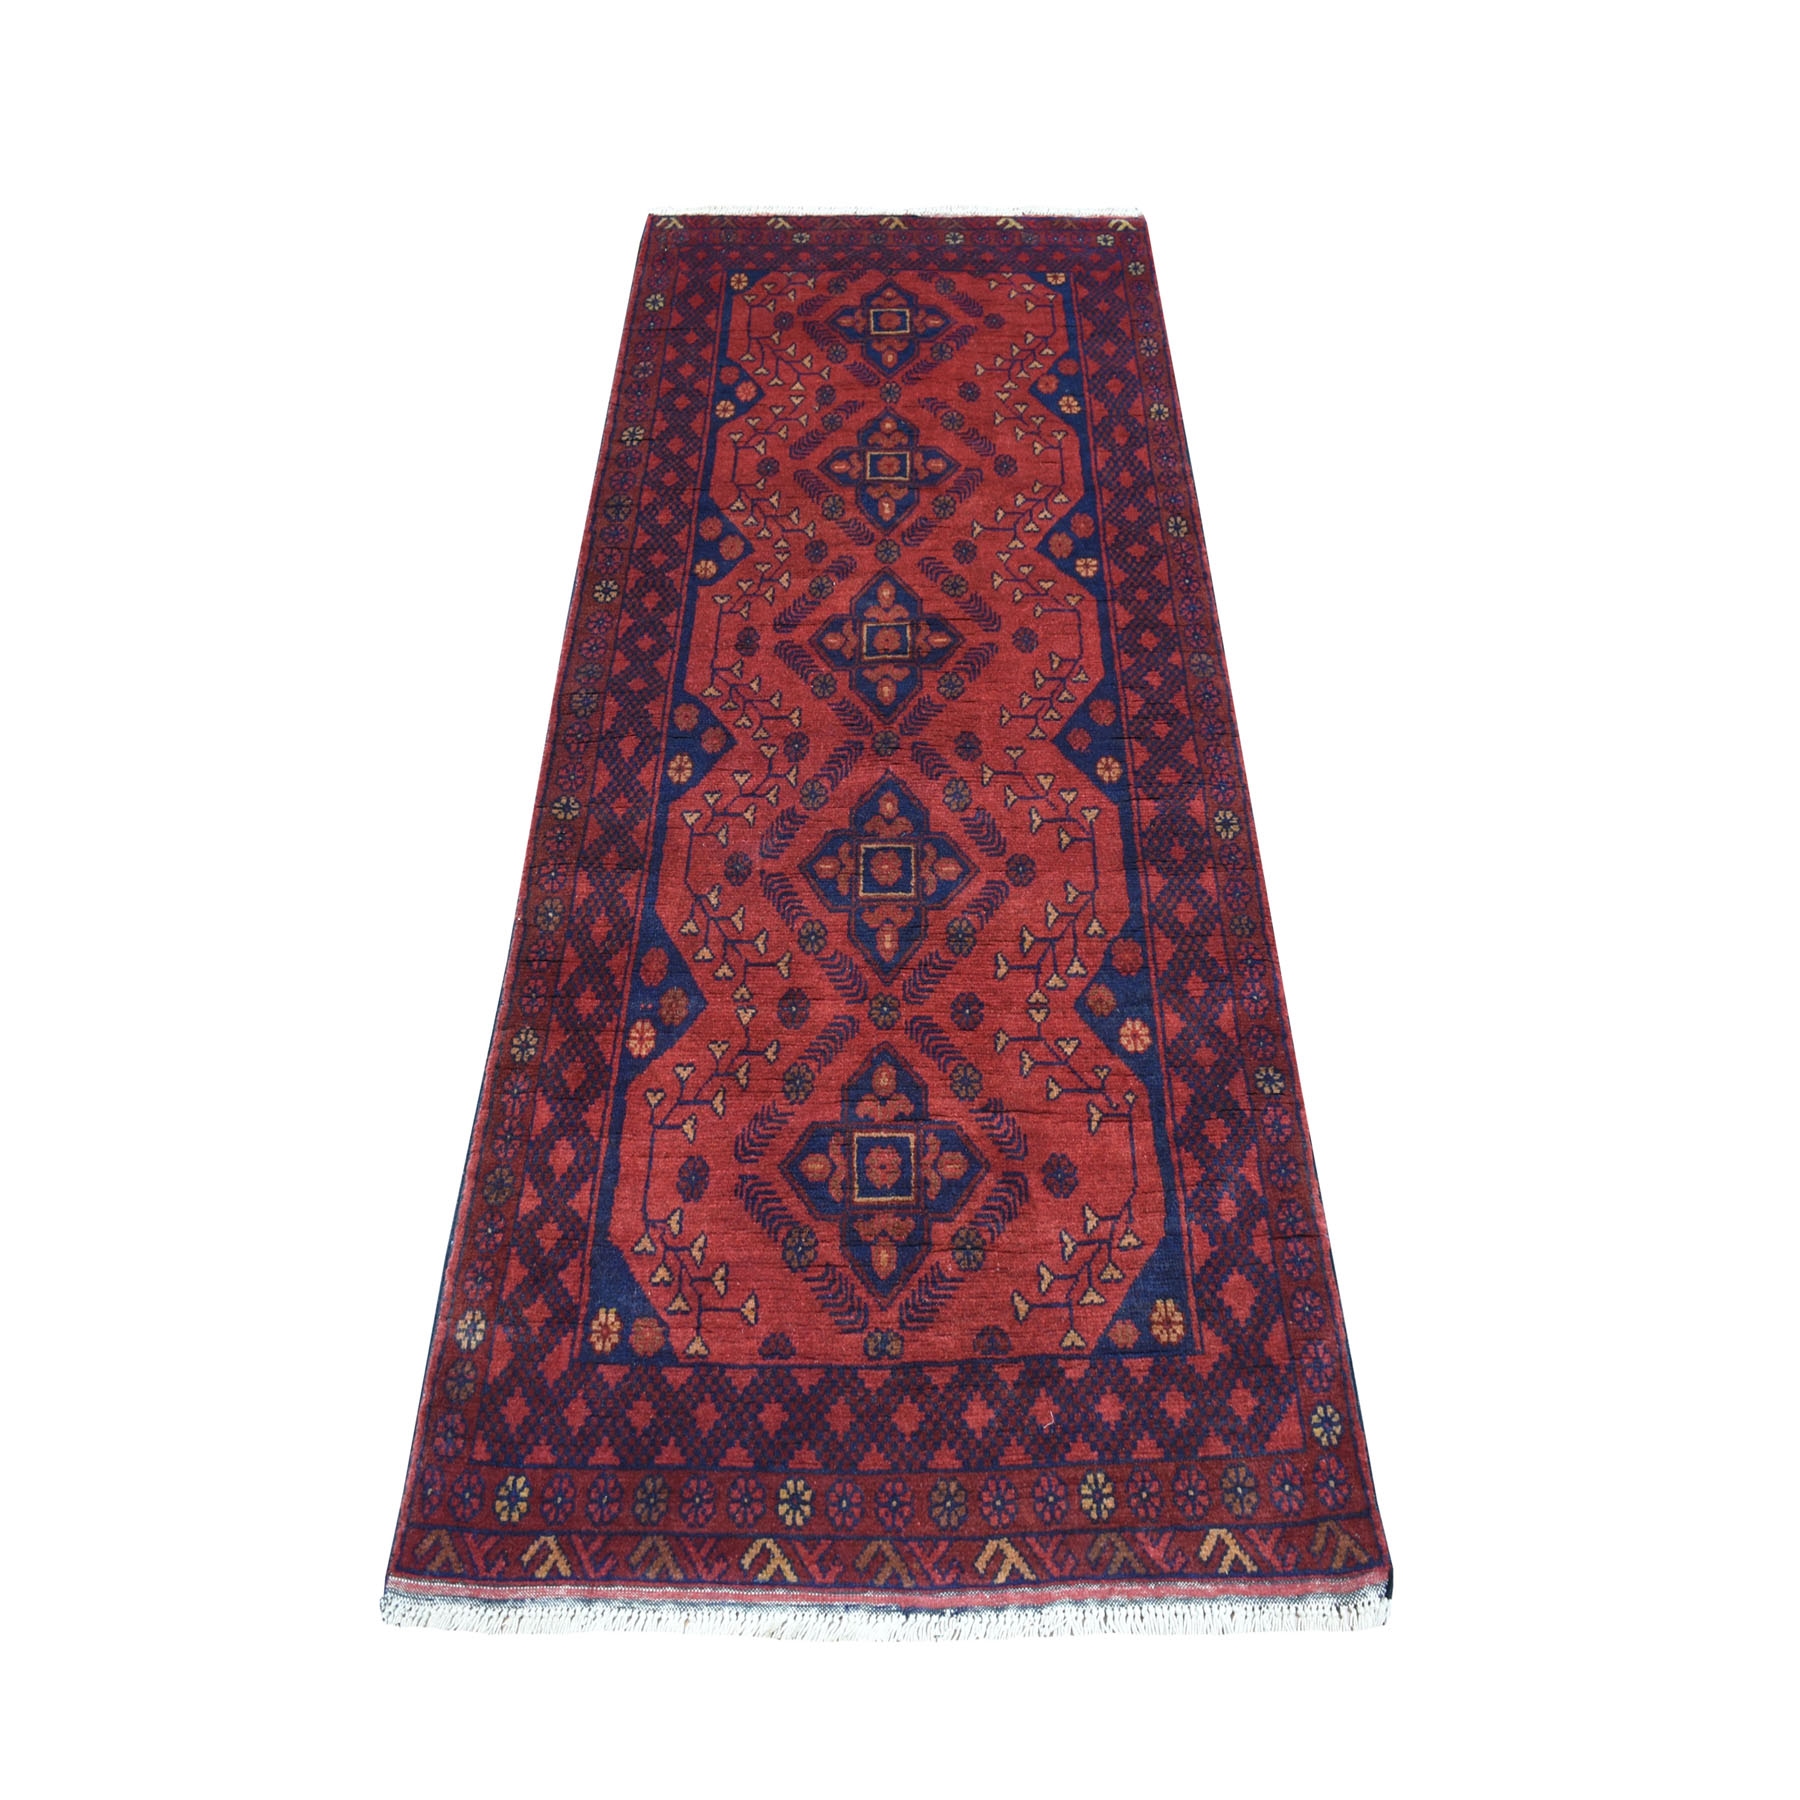 2'7"X6'5" Deep And Saturated Red Geometric Afghan Andkhoy Runner Pure Wool Hand Knotted Oriental Rug moaec699